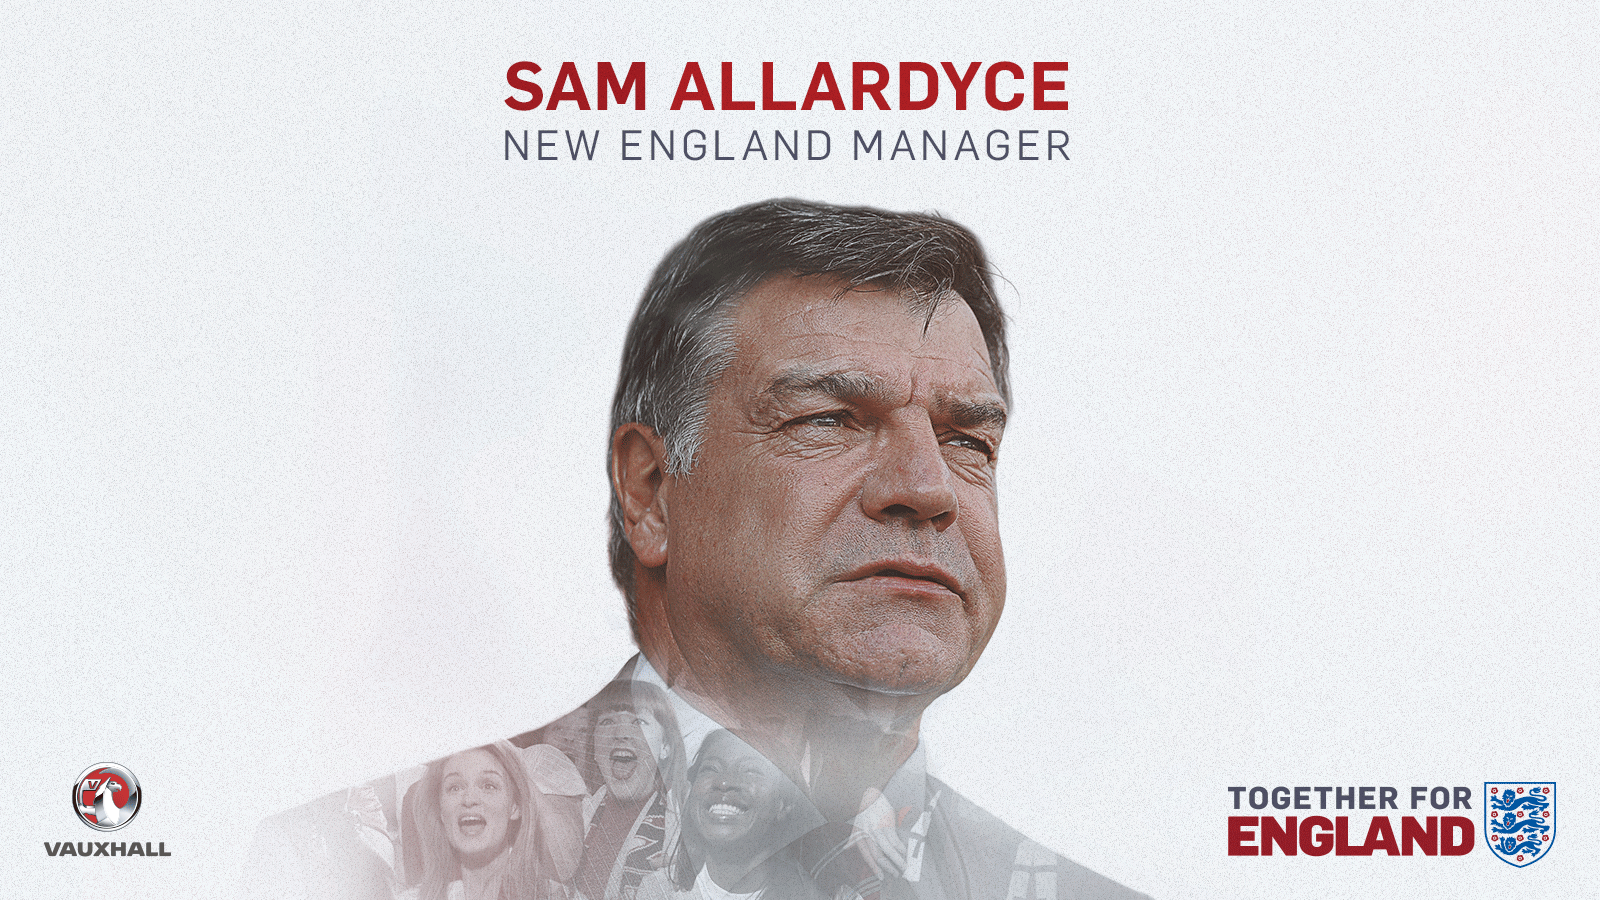 Sam Allardyce appointed as the new England manager